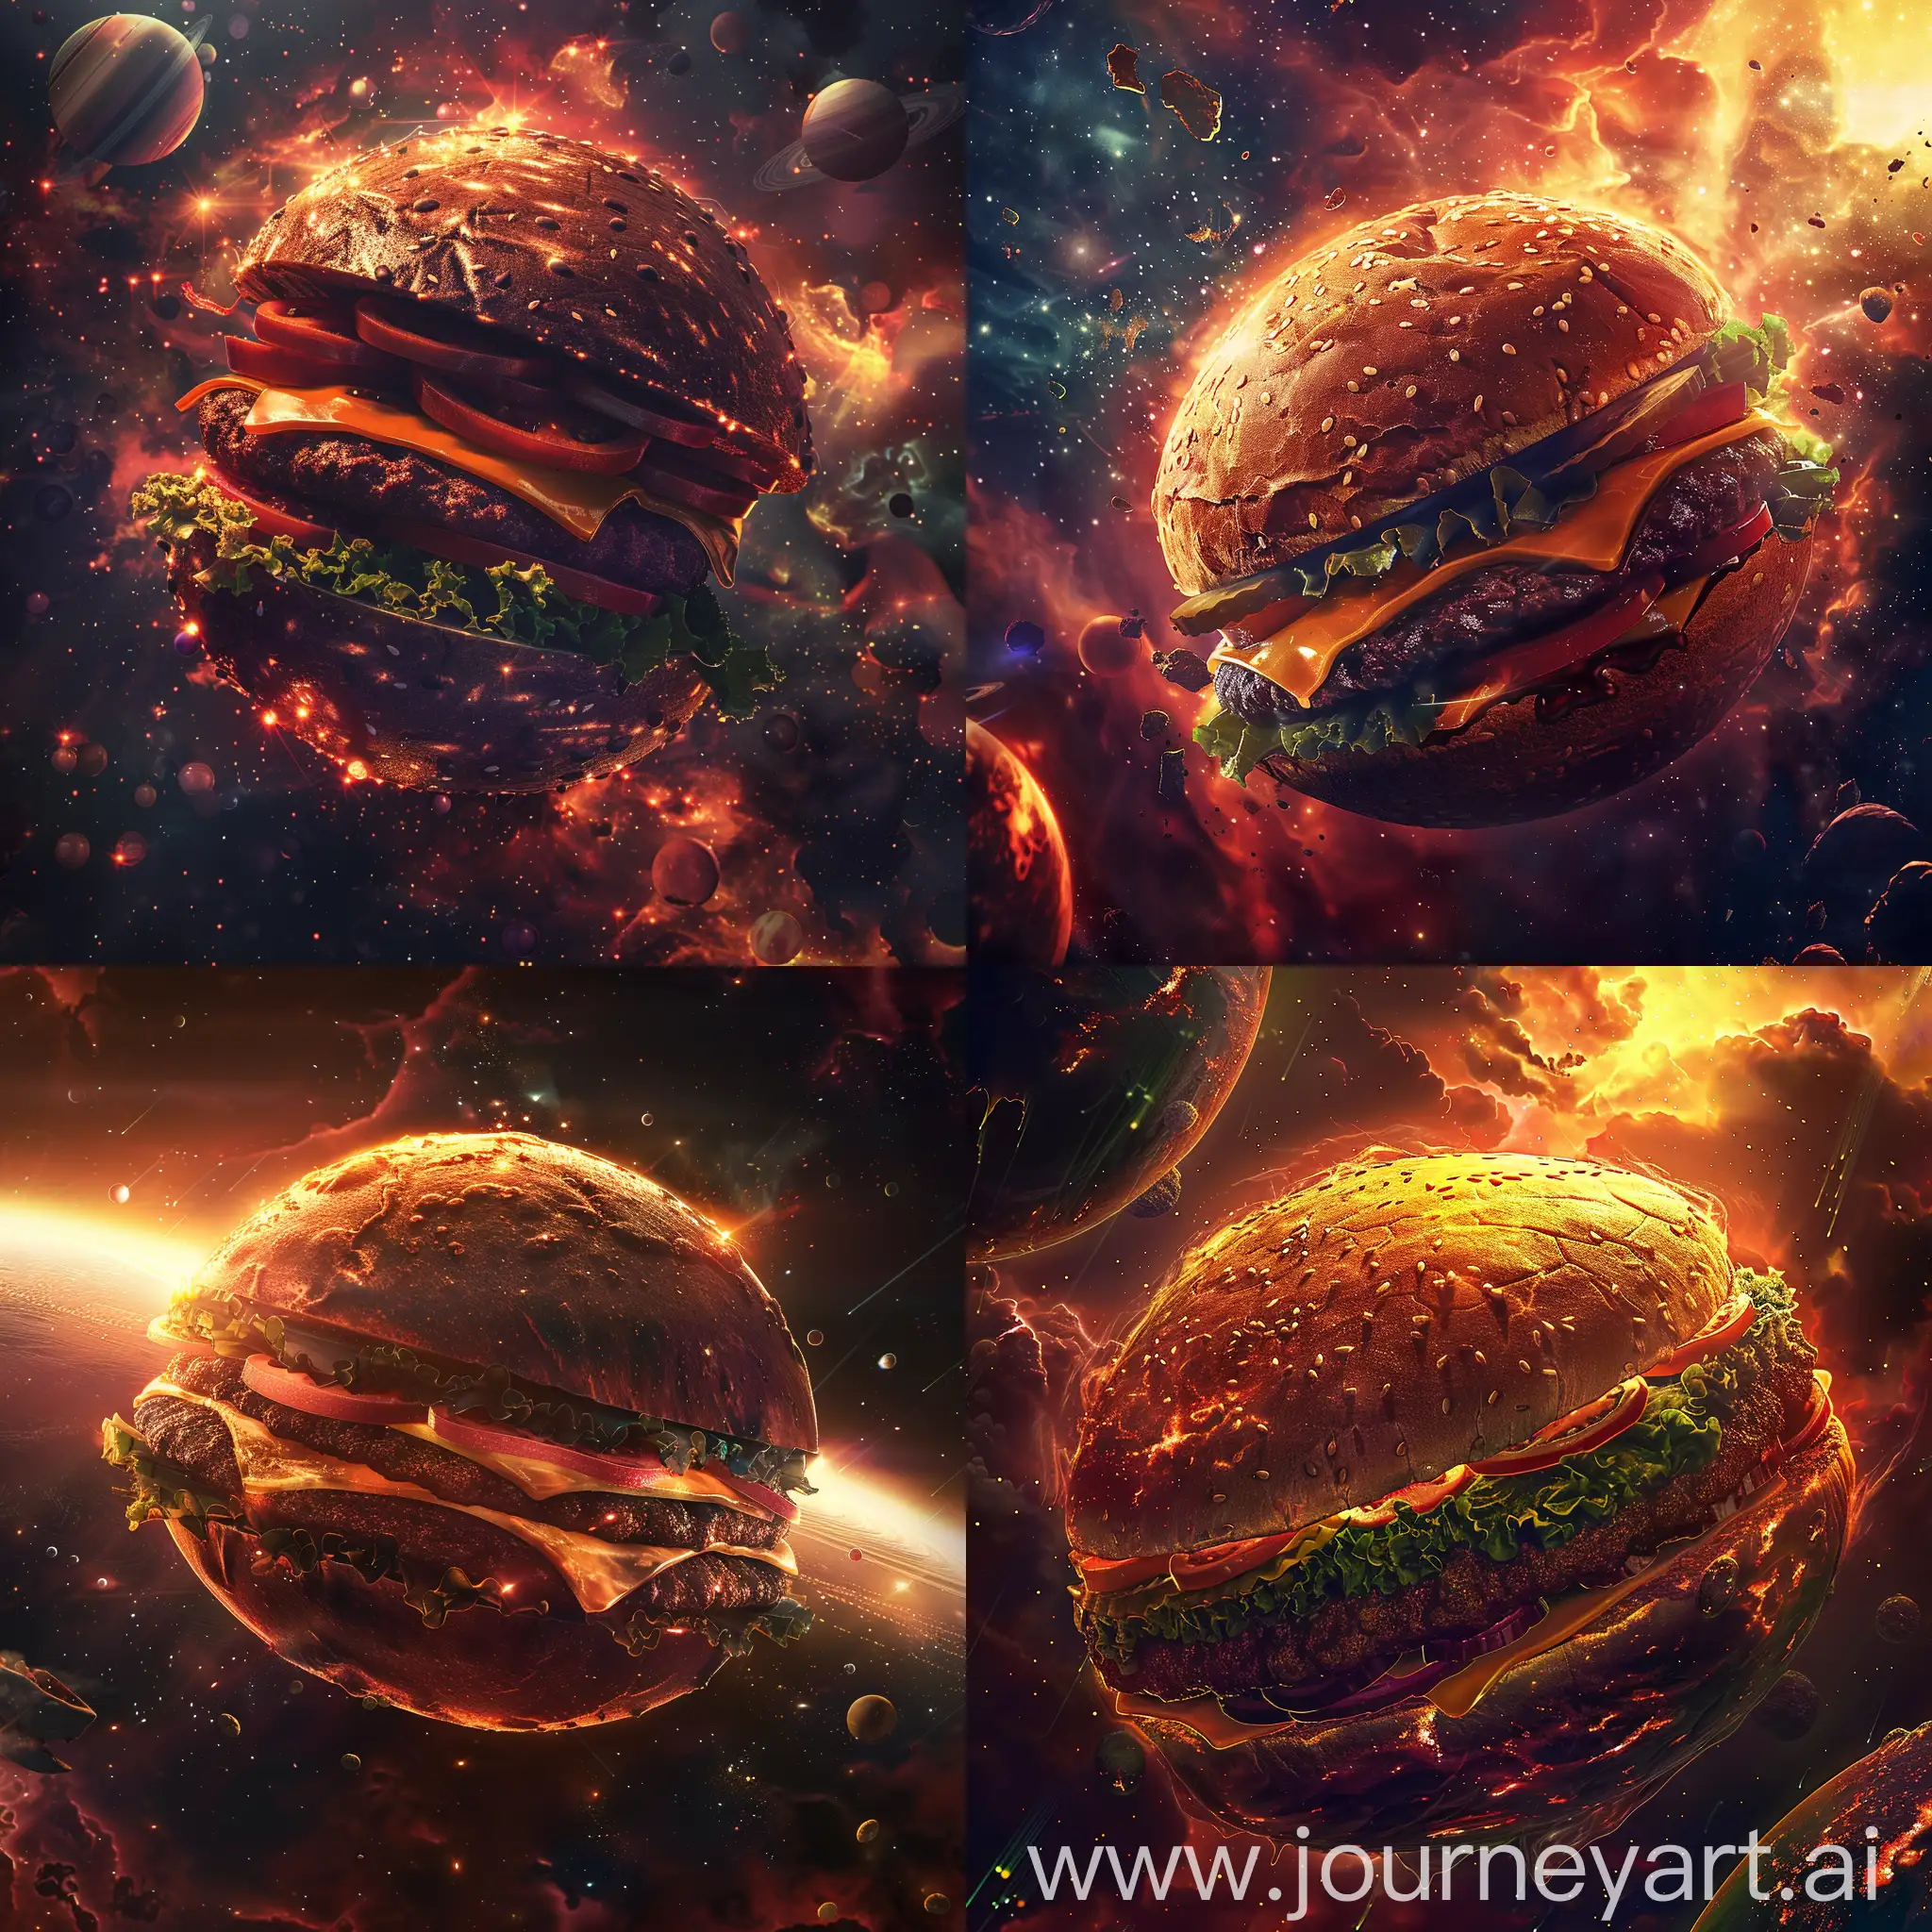 a giant burger-shaped planet floating in space, intricate details, highly detailed, photorealistic, dramatic lighting, glowing atmosphere, celestial background, outer space, planets, stars, nebulae, cinematic composition, stunning visual effects, realistic textures, mouthwatering, appetizing, surreal, imaginative, conceptual art